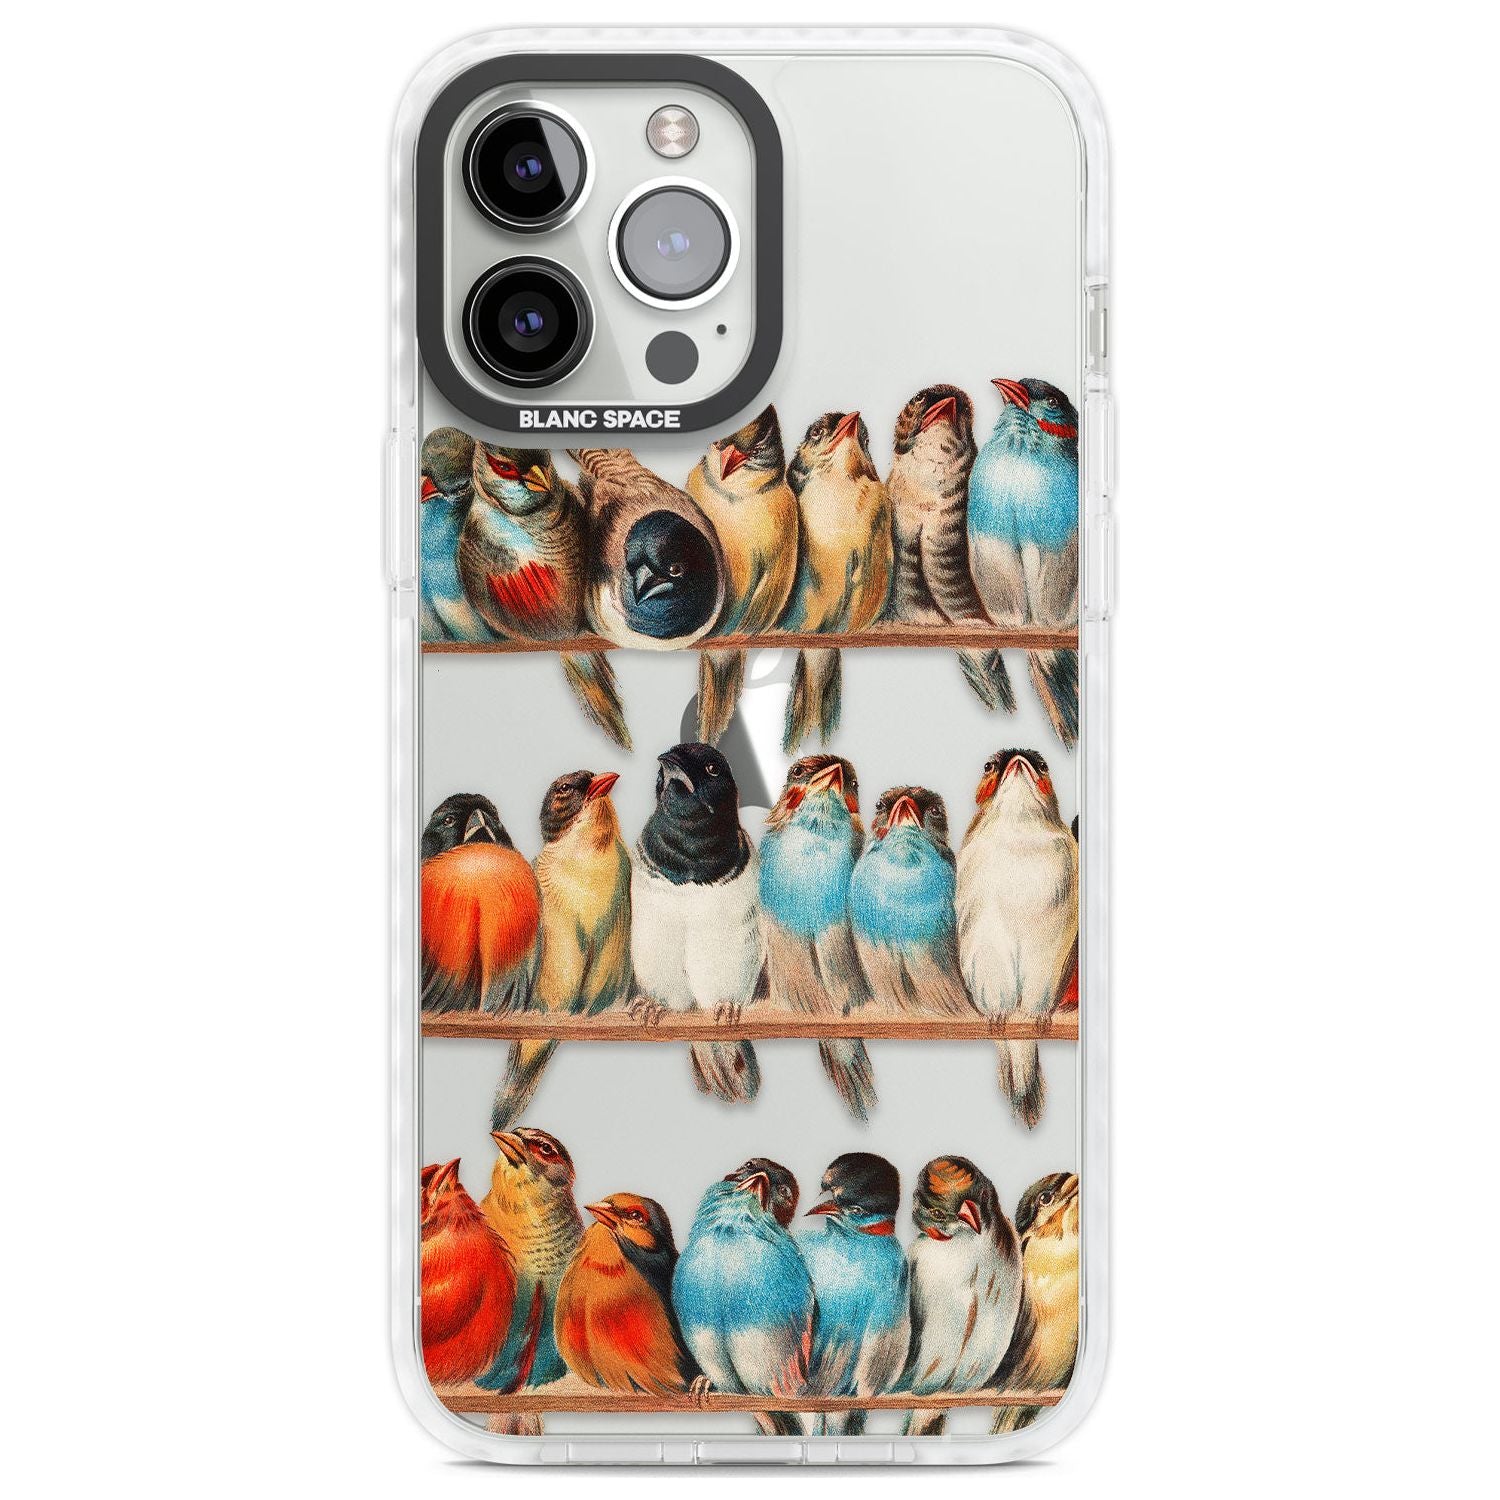 A Perch of Birds Phone Case iPhone 13 Pro Max / Impact Case,iPhone 14 Pro Max / Impact Case Blanc Space